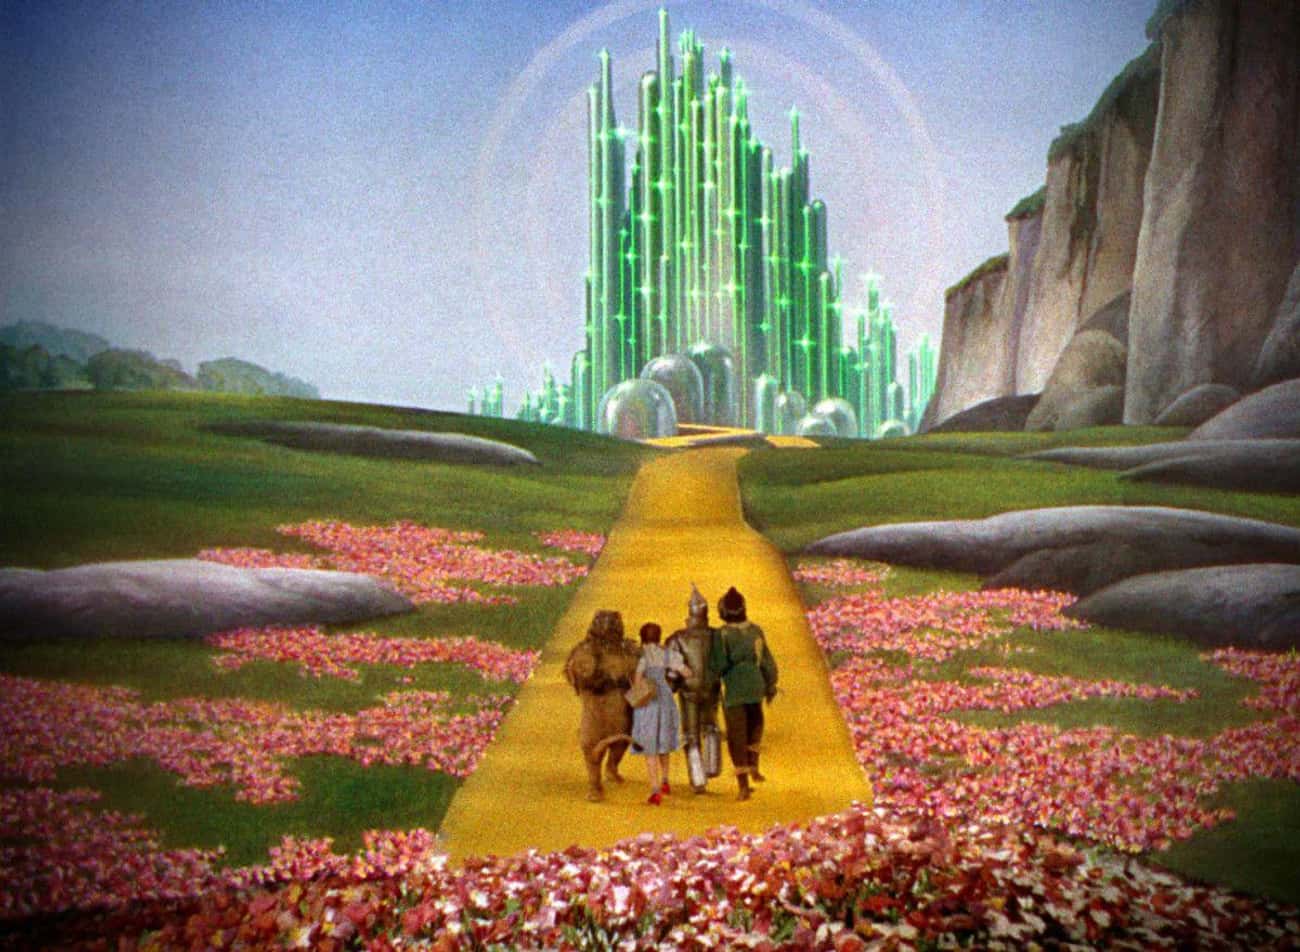 The Land Of Oz Is A Parallel Dimension In 'The Wizard Of Oz'